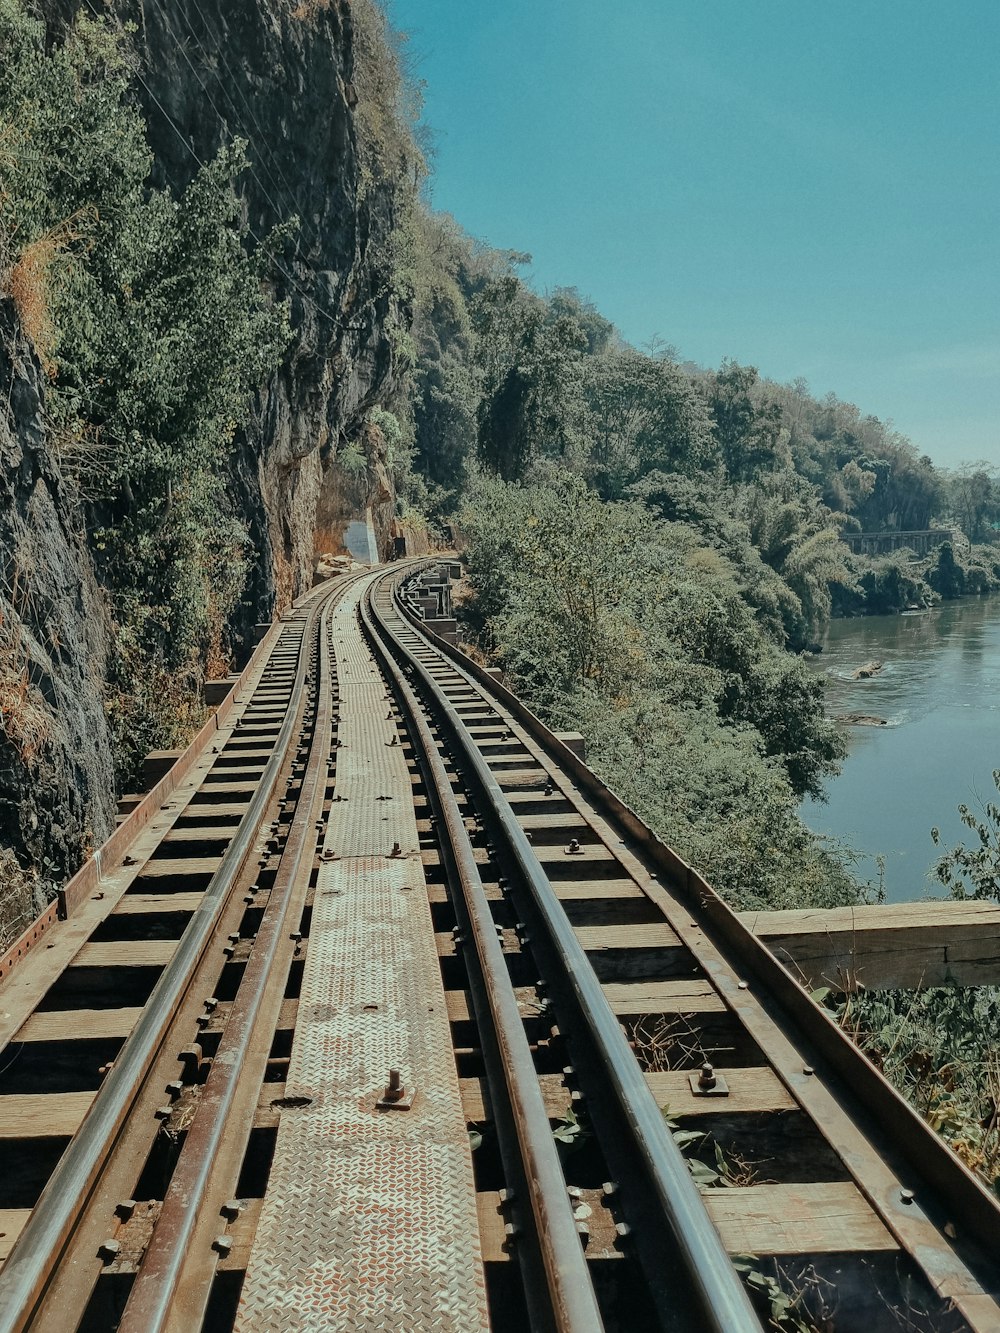 a view of a train track next to a river